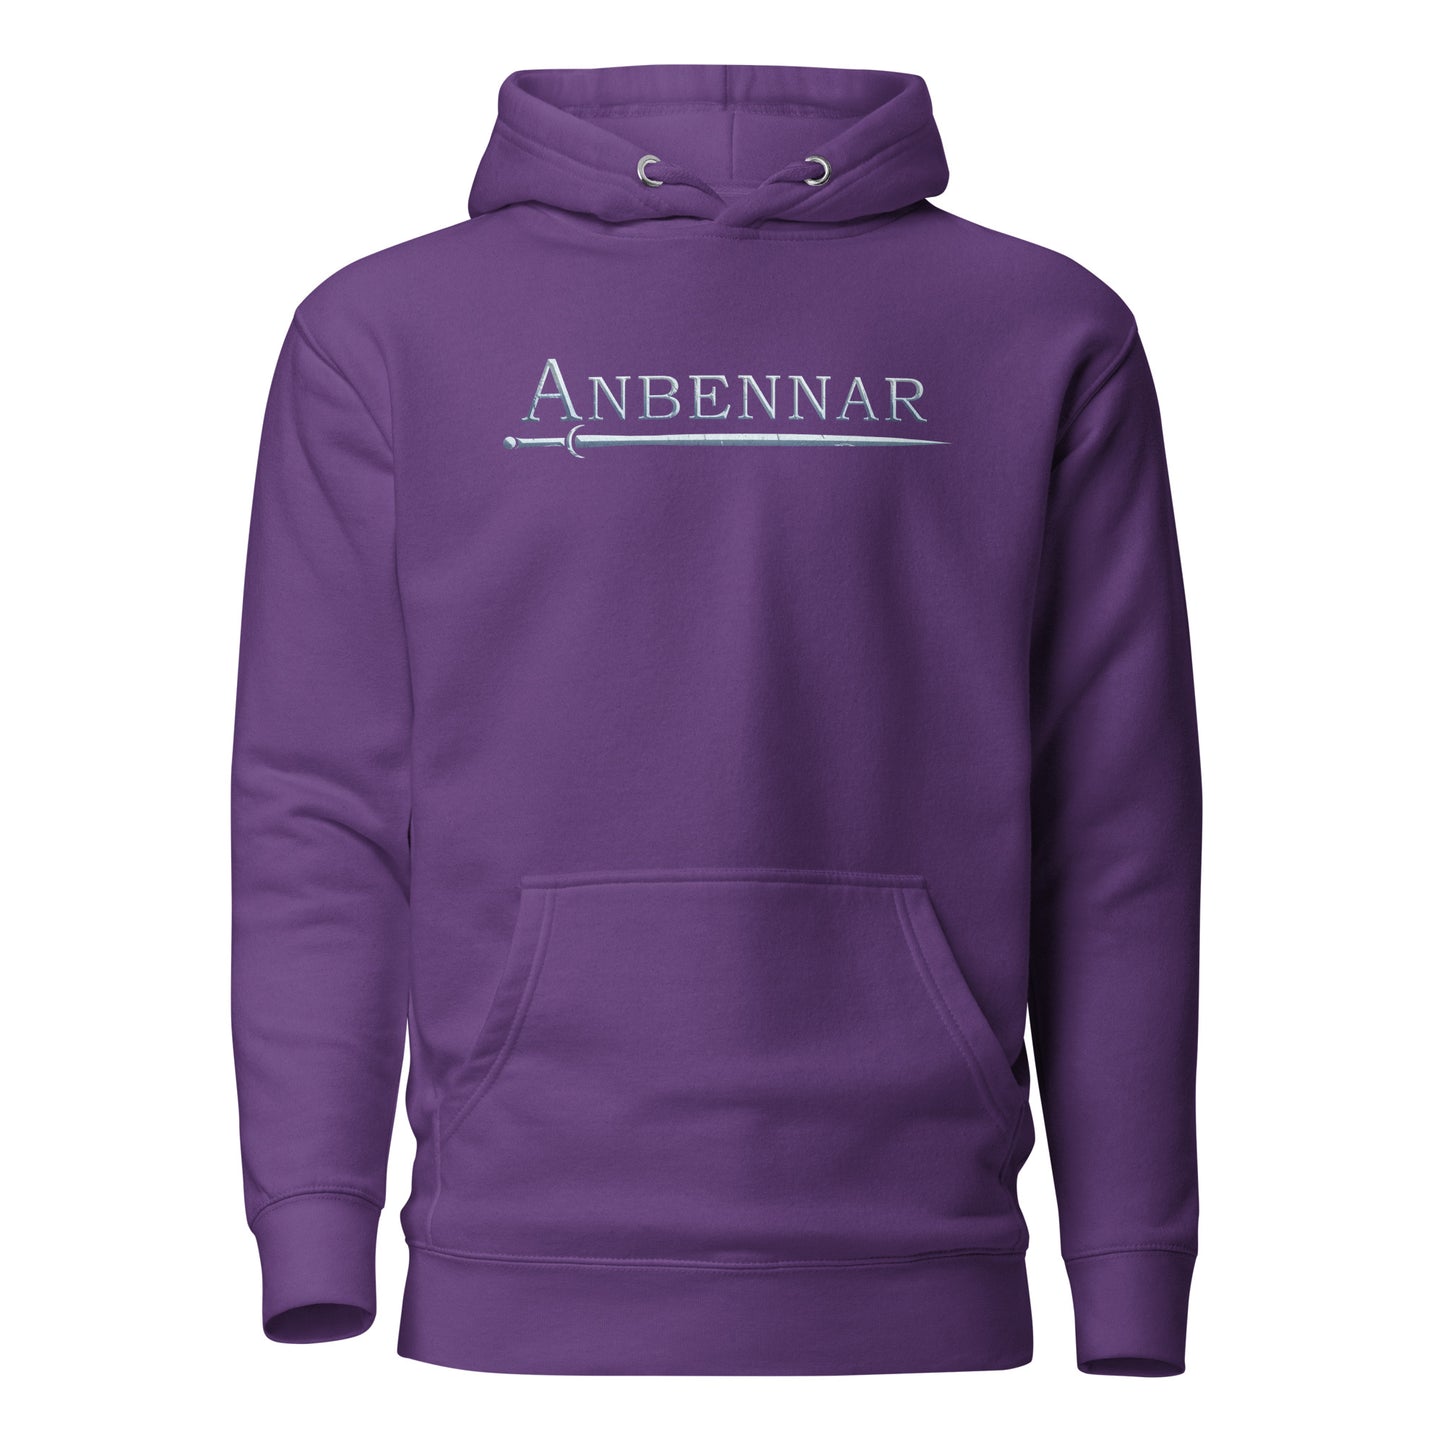 Anbennar Text Logo, Silver Font - 1st Edition Limited - Unisex Hoodie